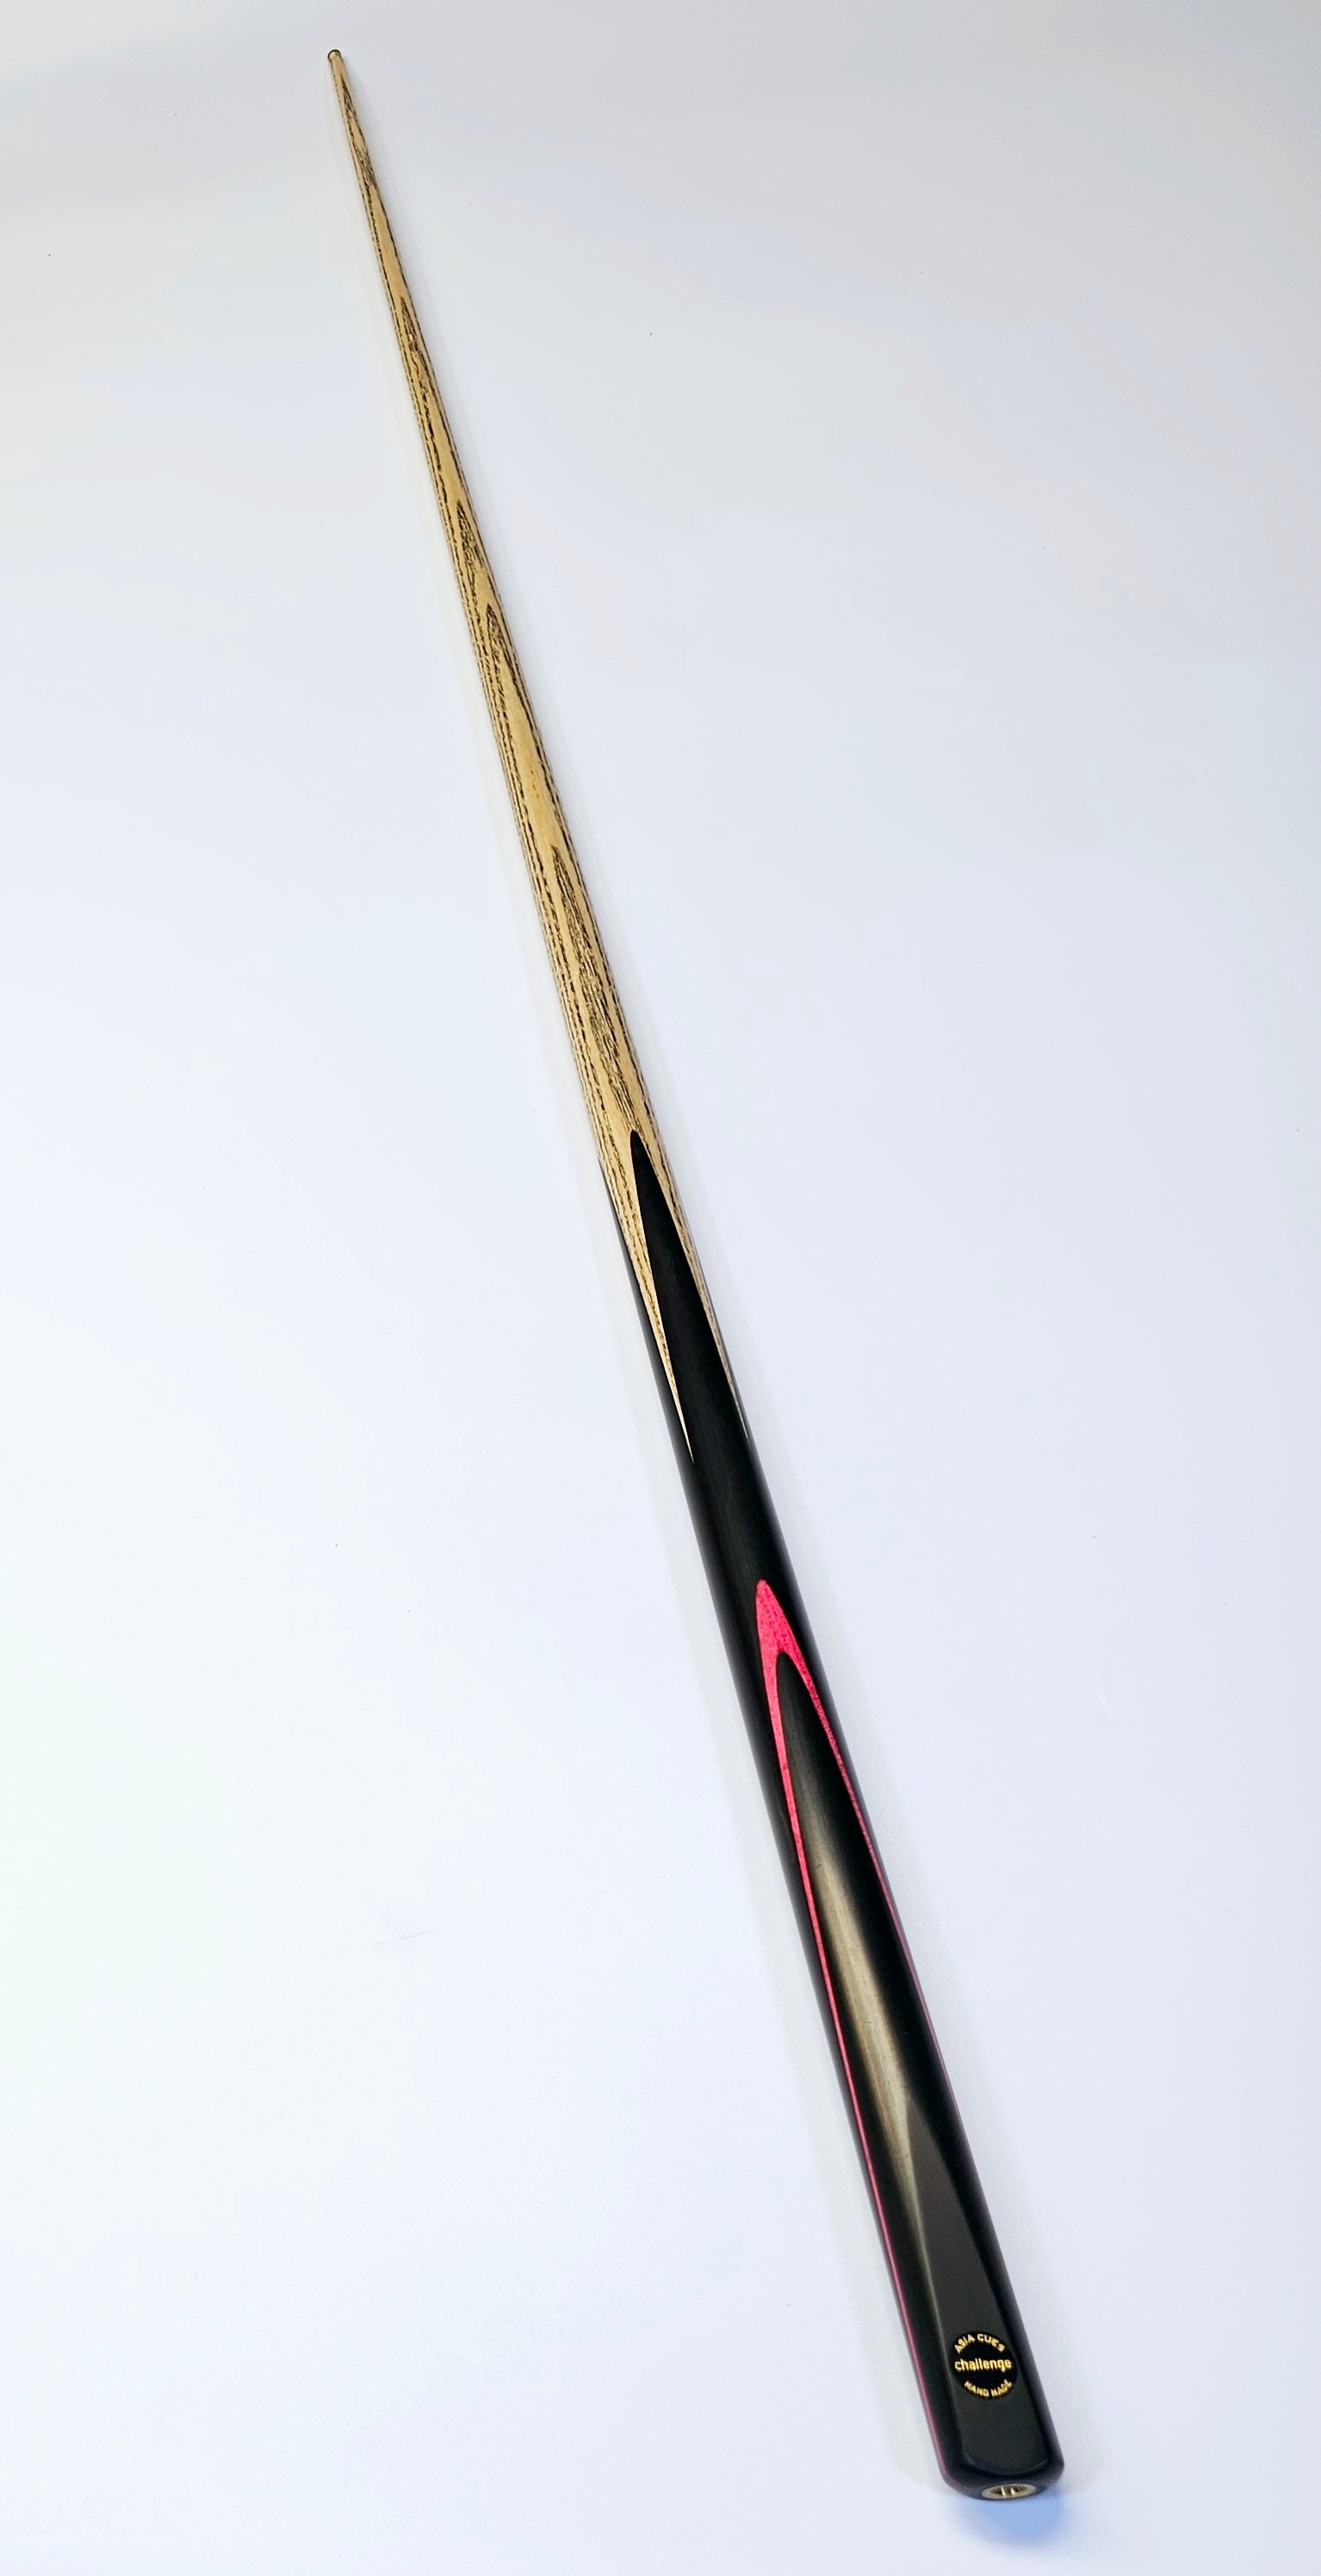 Asia Cues Challenge - One Piece Snooker Cue 9.4mm Tip, 17.1oz, 58"